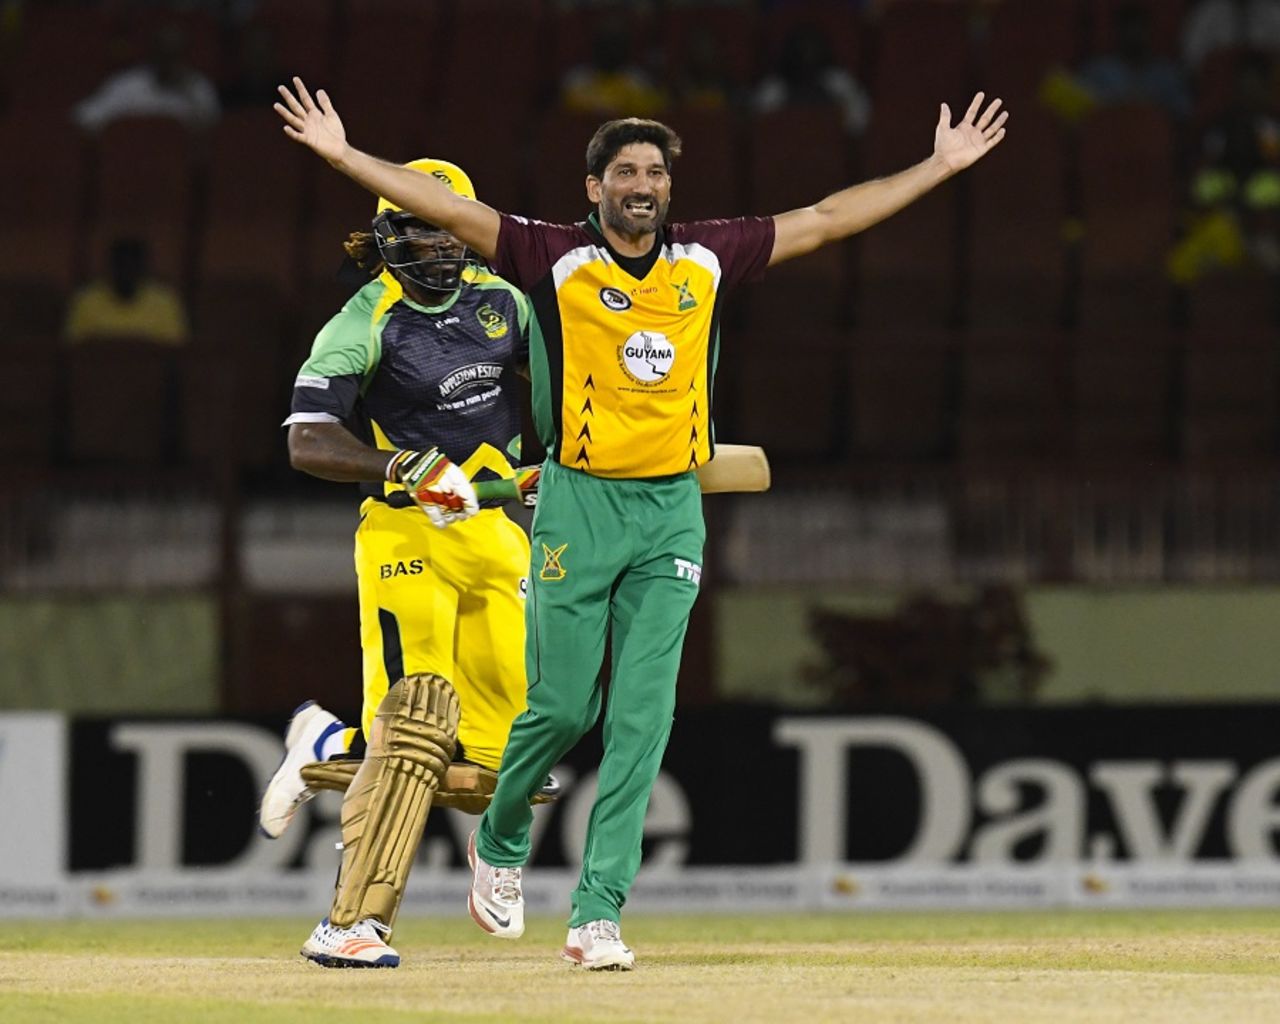 Sohail Tanvir dismissed Chris Gayle in the first over, Guyana Amazon Warriors v Jamaica Tallawahs, CPL 2016, Providence, July 7, 2016